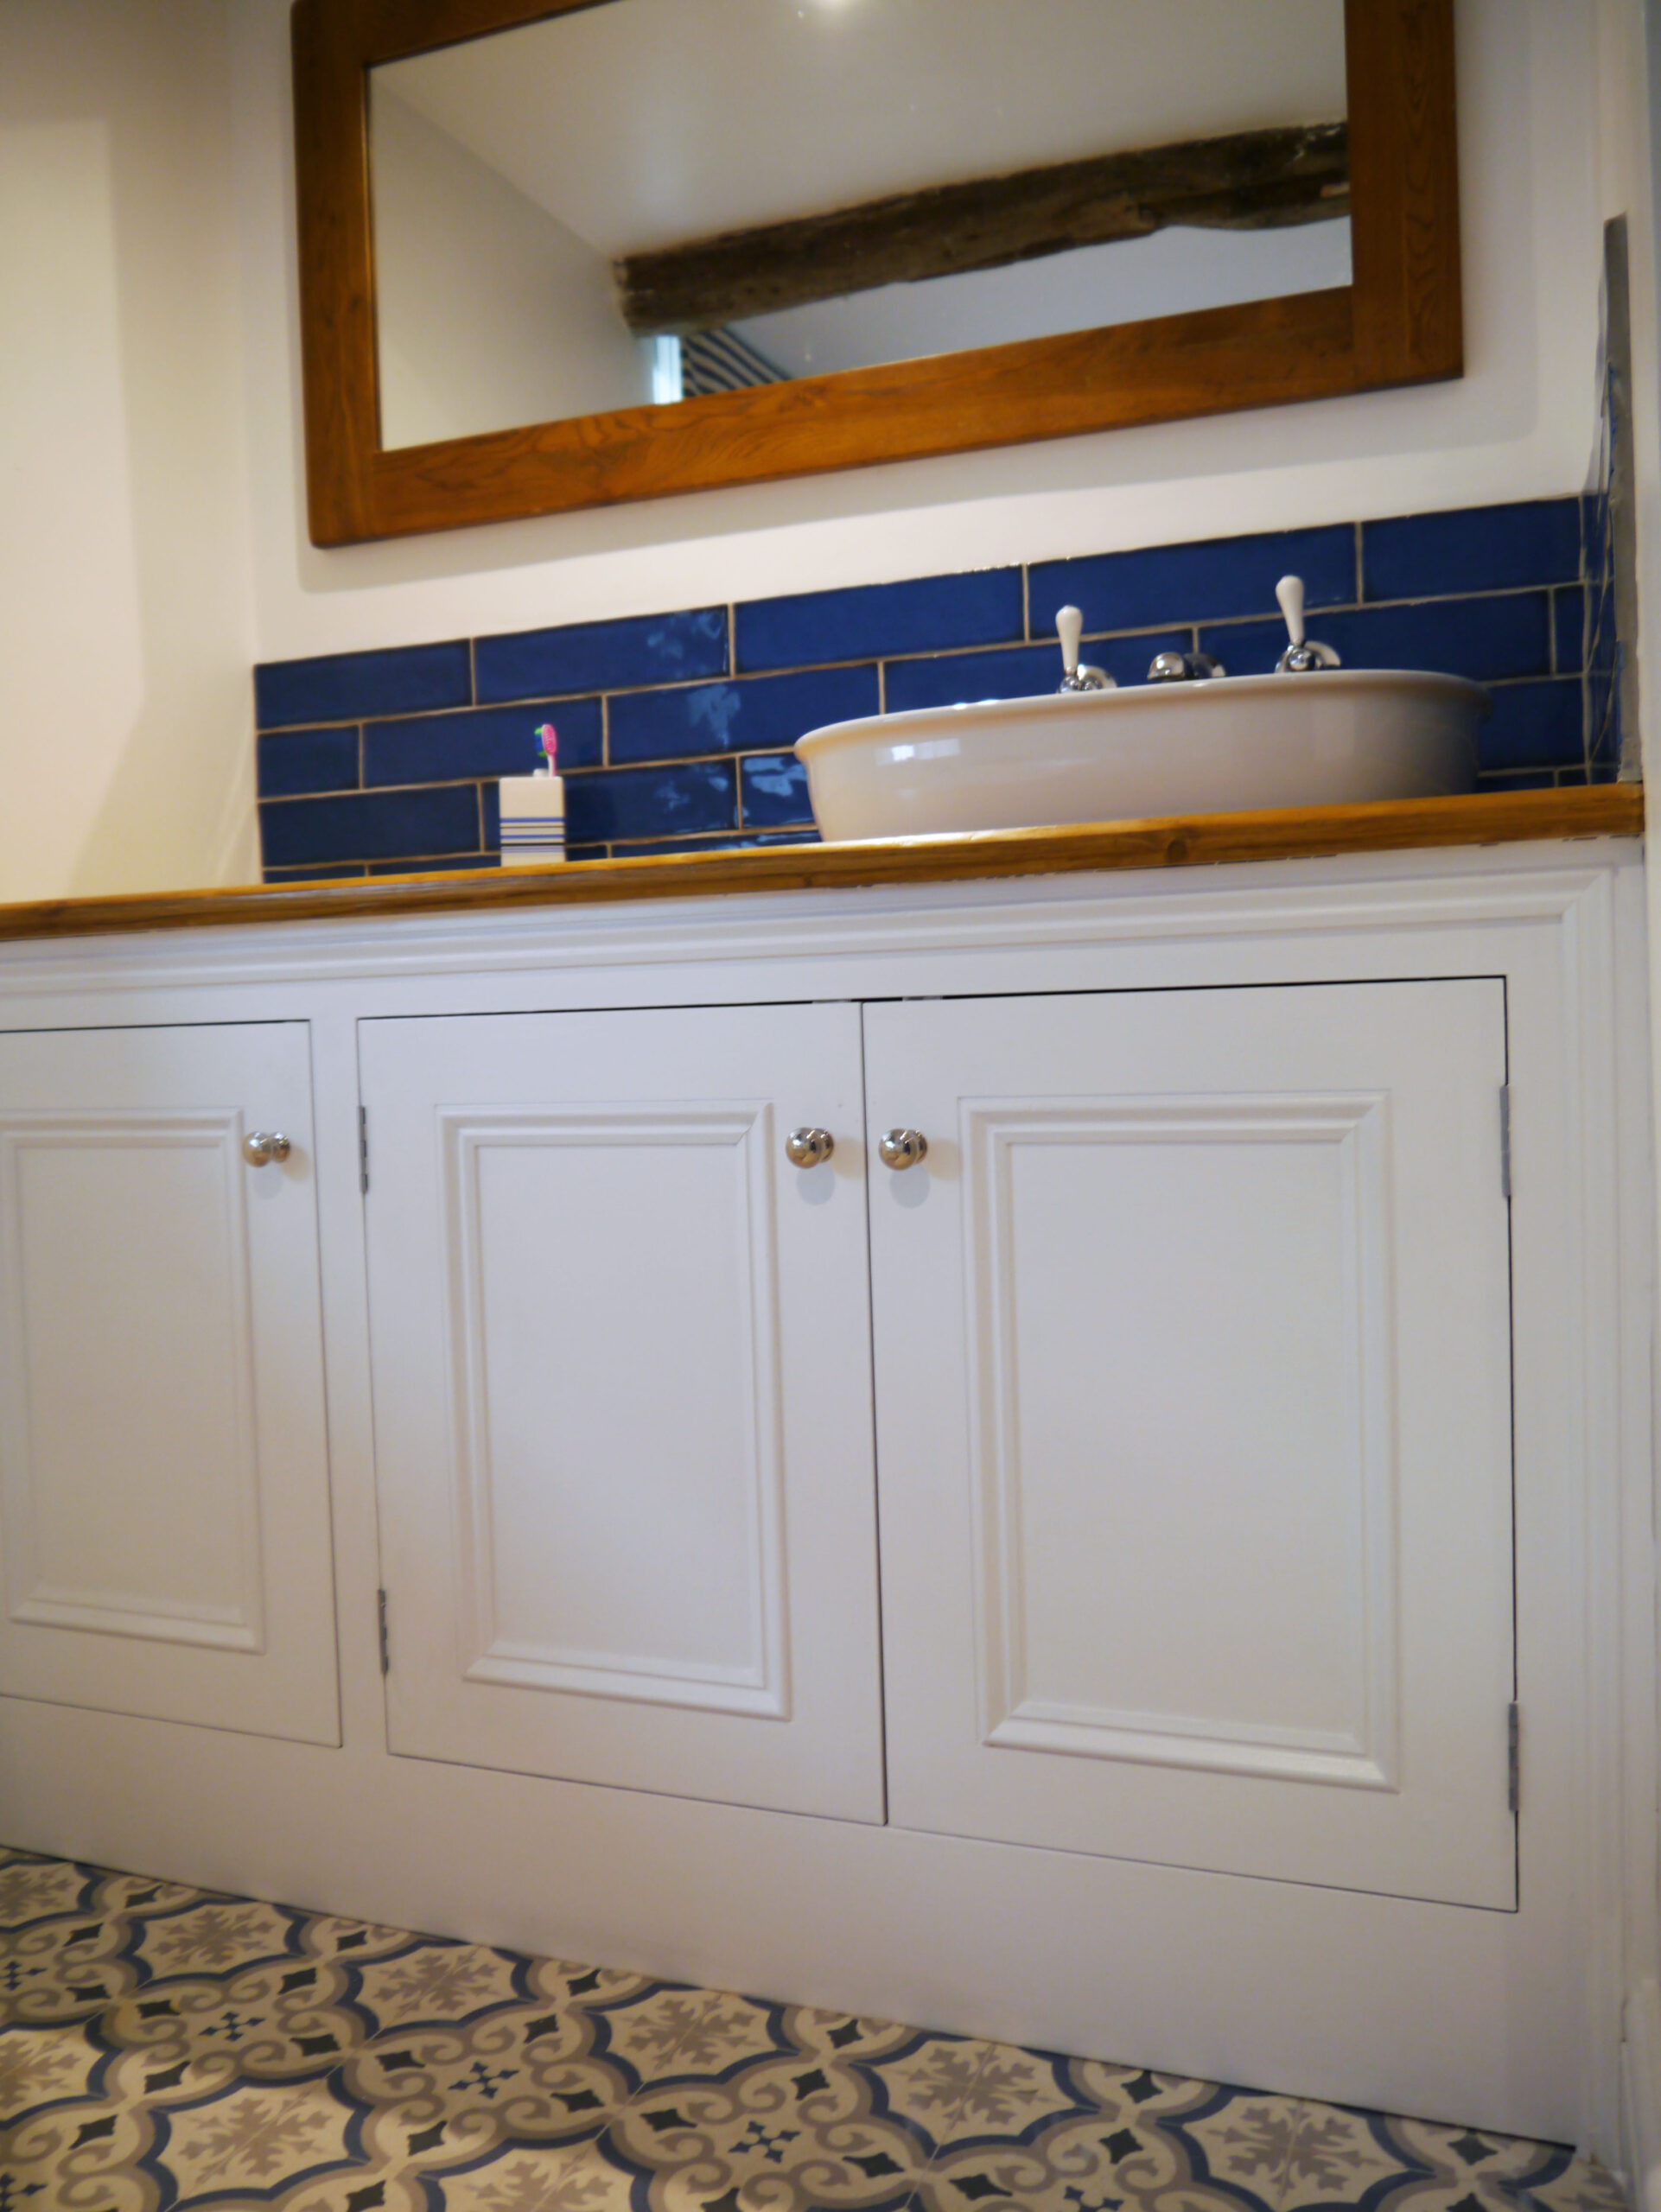 Bespoke white bathroom sink units by Kings Stag Joinery